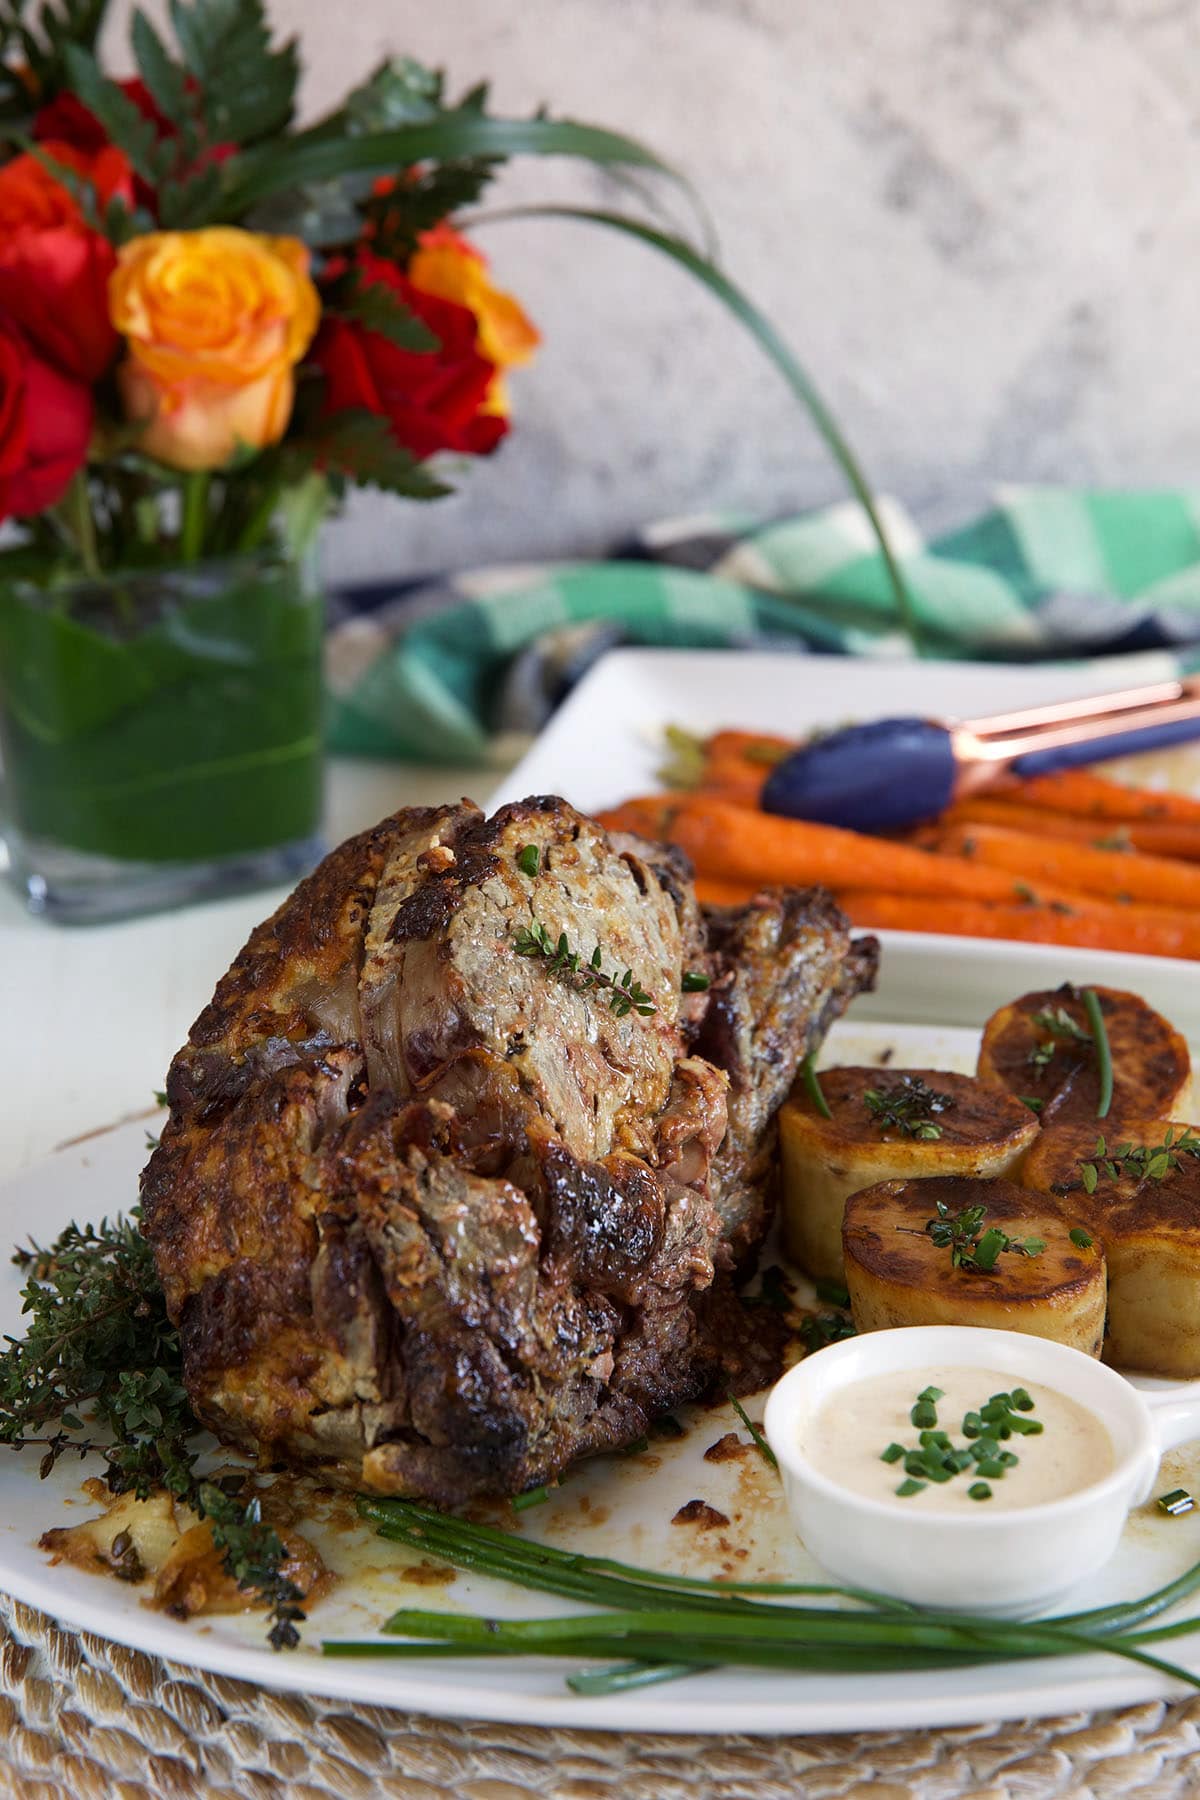 A prime rib roast is presented on a white plate.